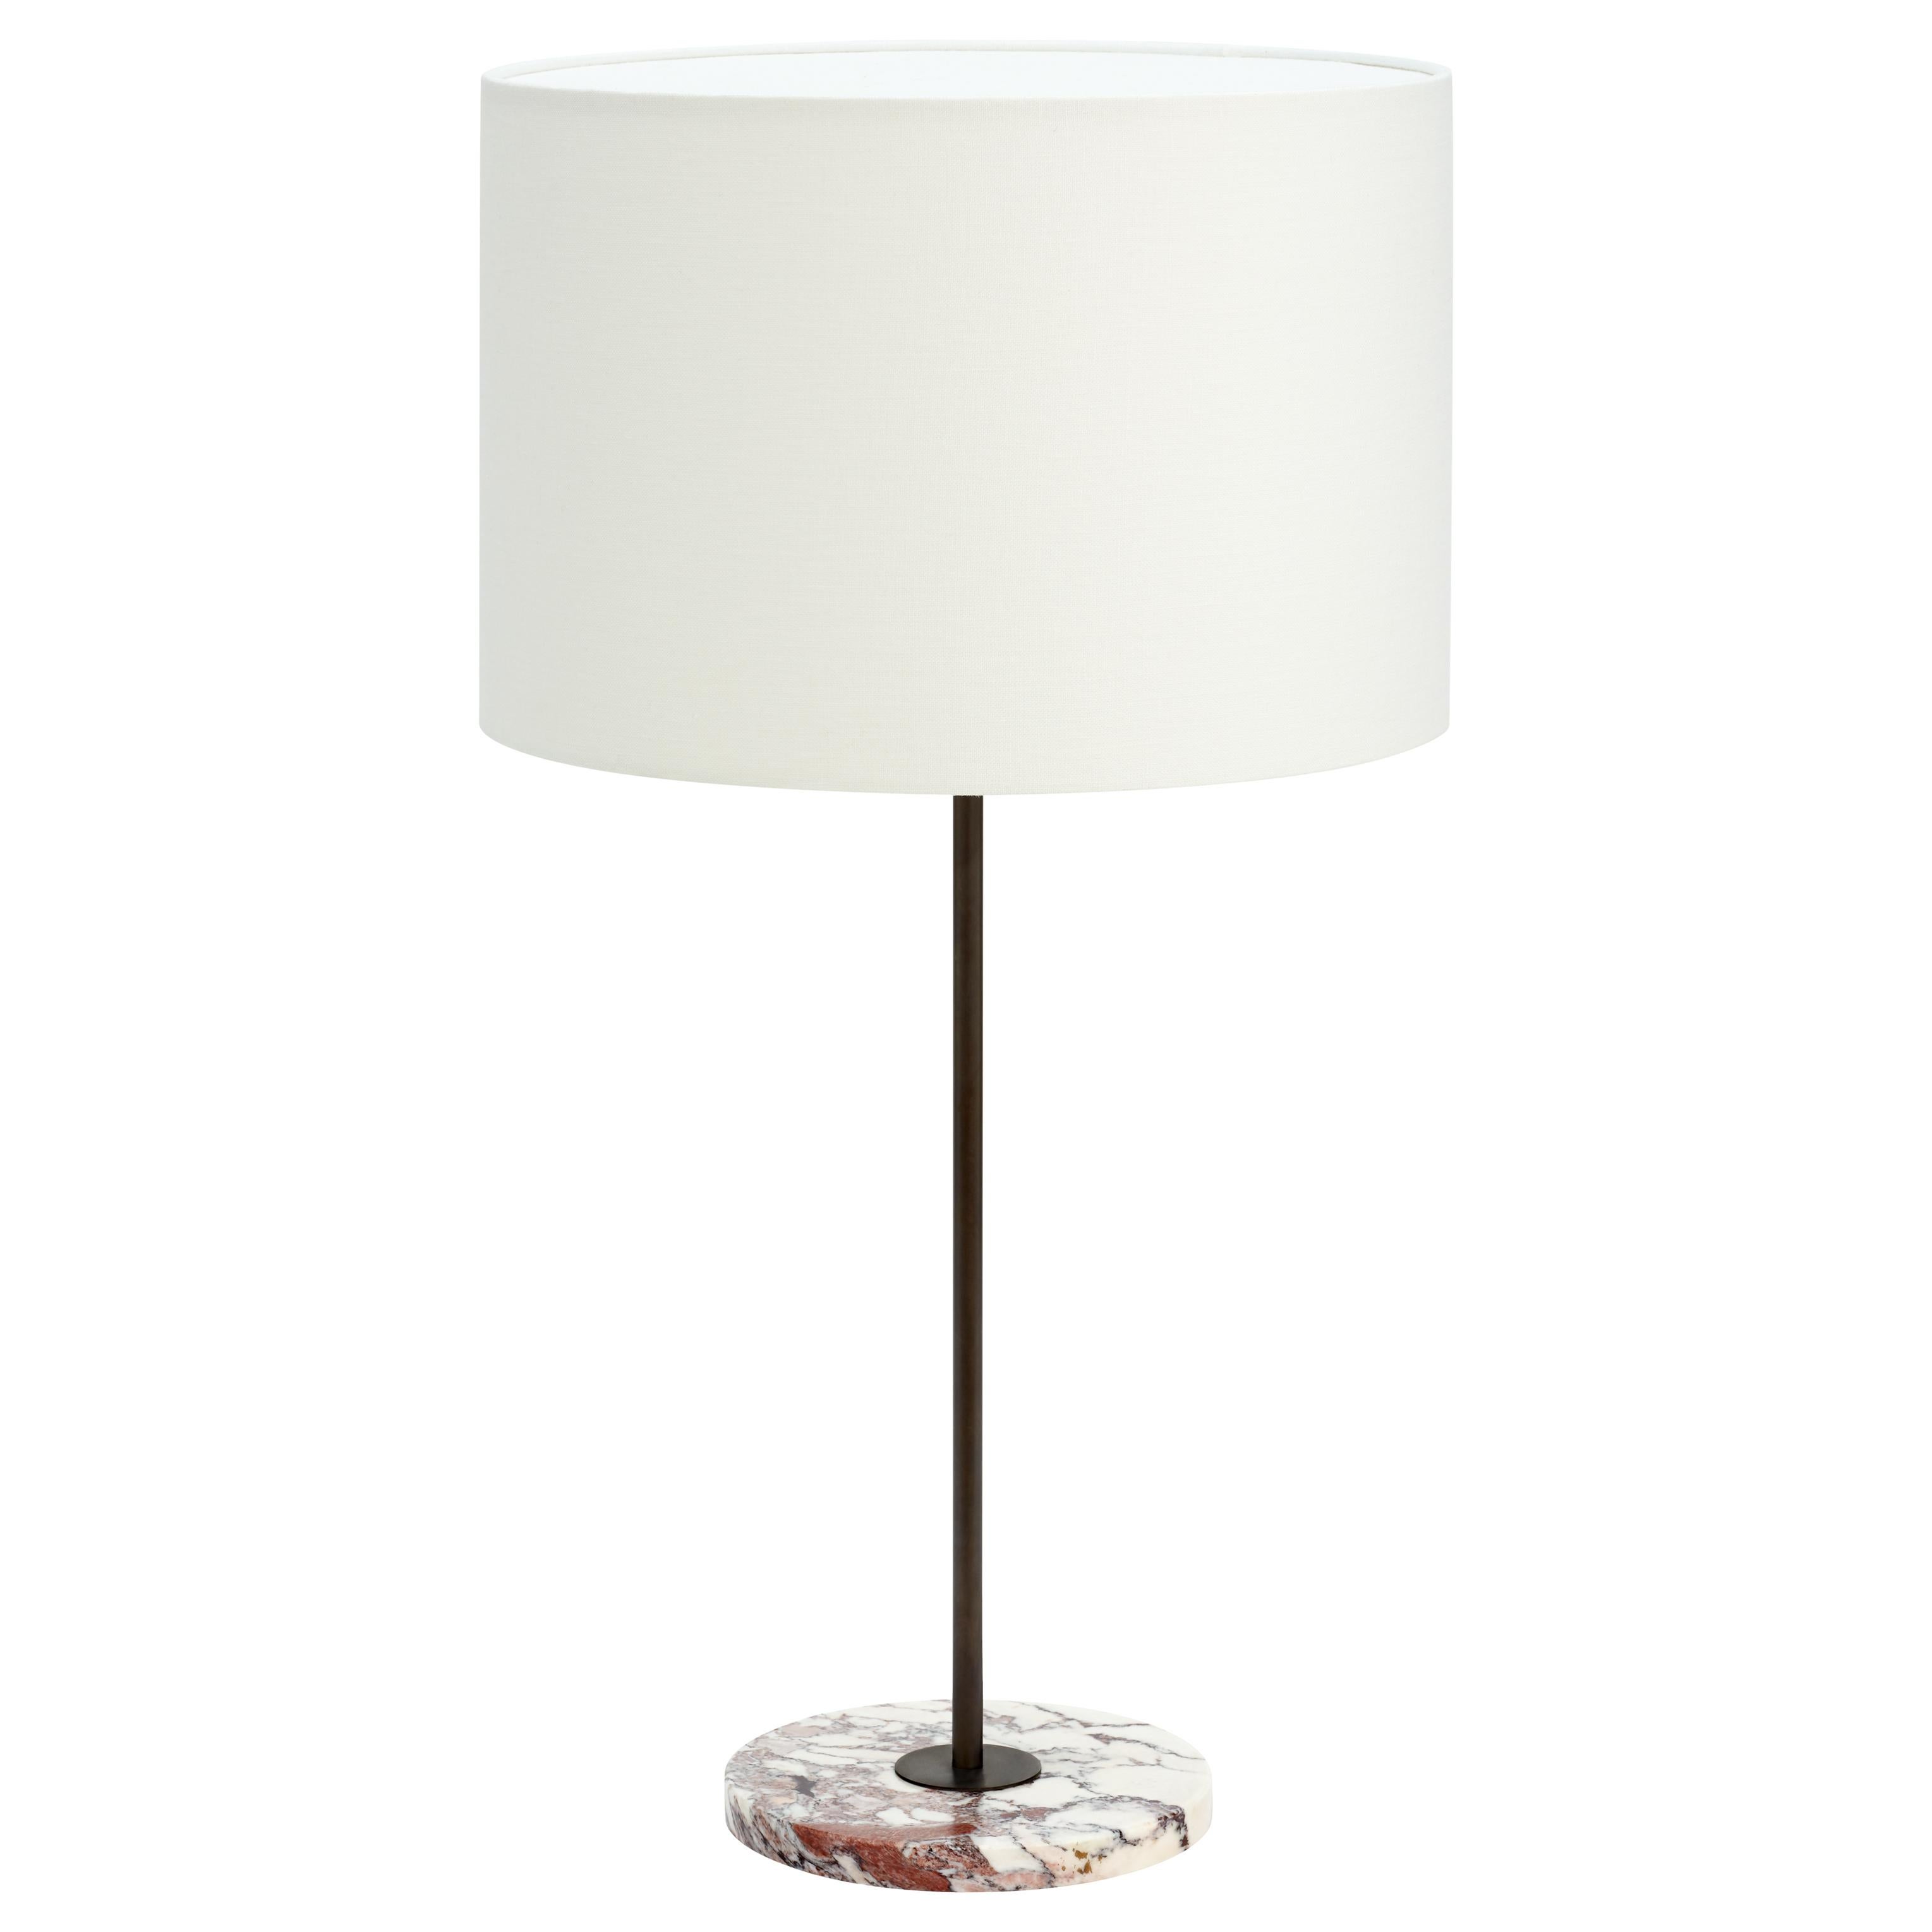 Tall Calacatta Viola marble mayfair table lamp by CTO Lighting
Materials: Polished calacatta viola marble base with bronze and white linen shade
Dimensions: 38 x H 72 cm

All our lamps can be wired according to each country. If sold to the USA it